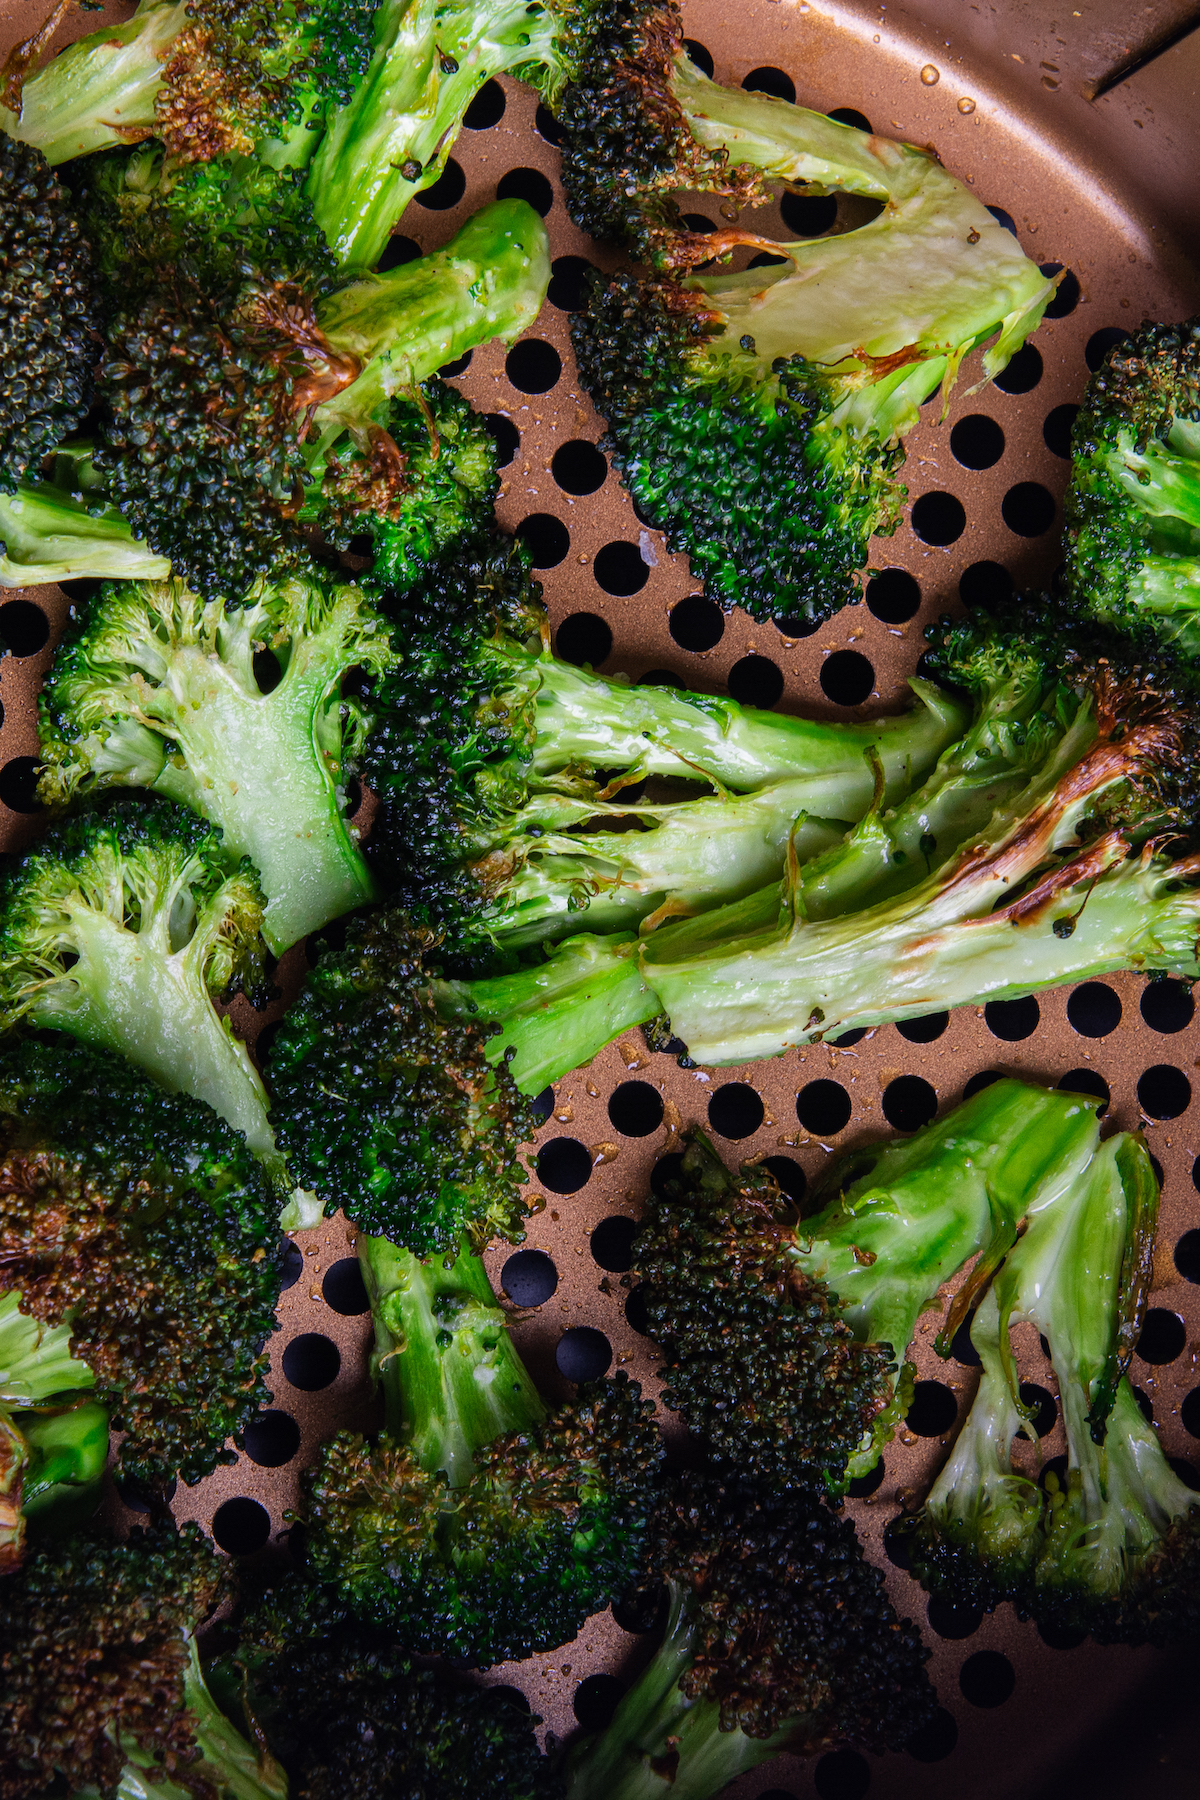 An air fryer basket with roasted broccoli florets.